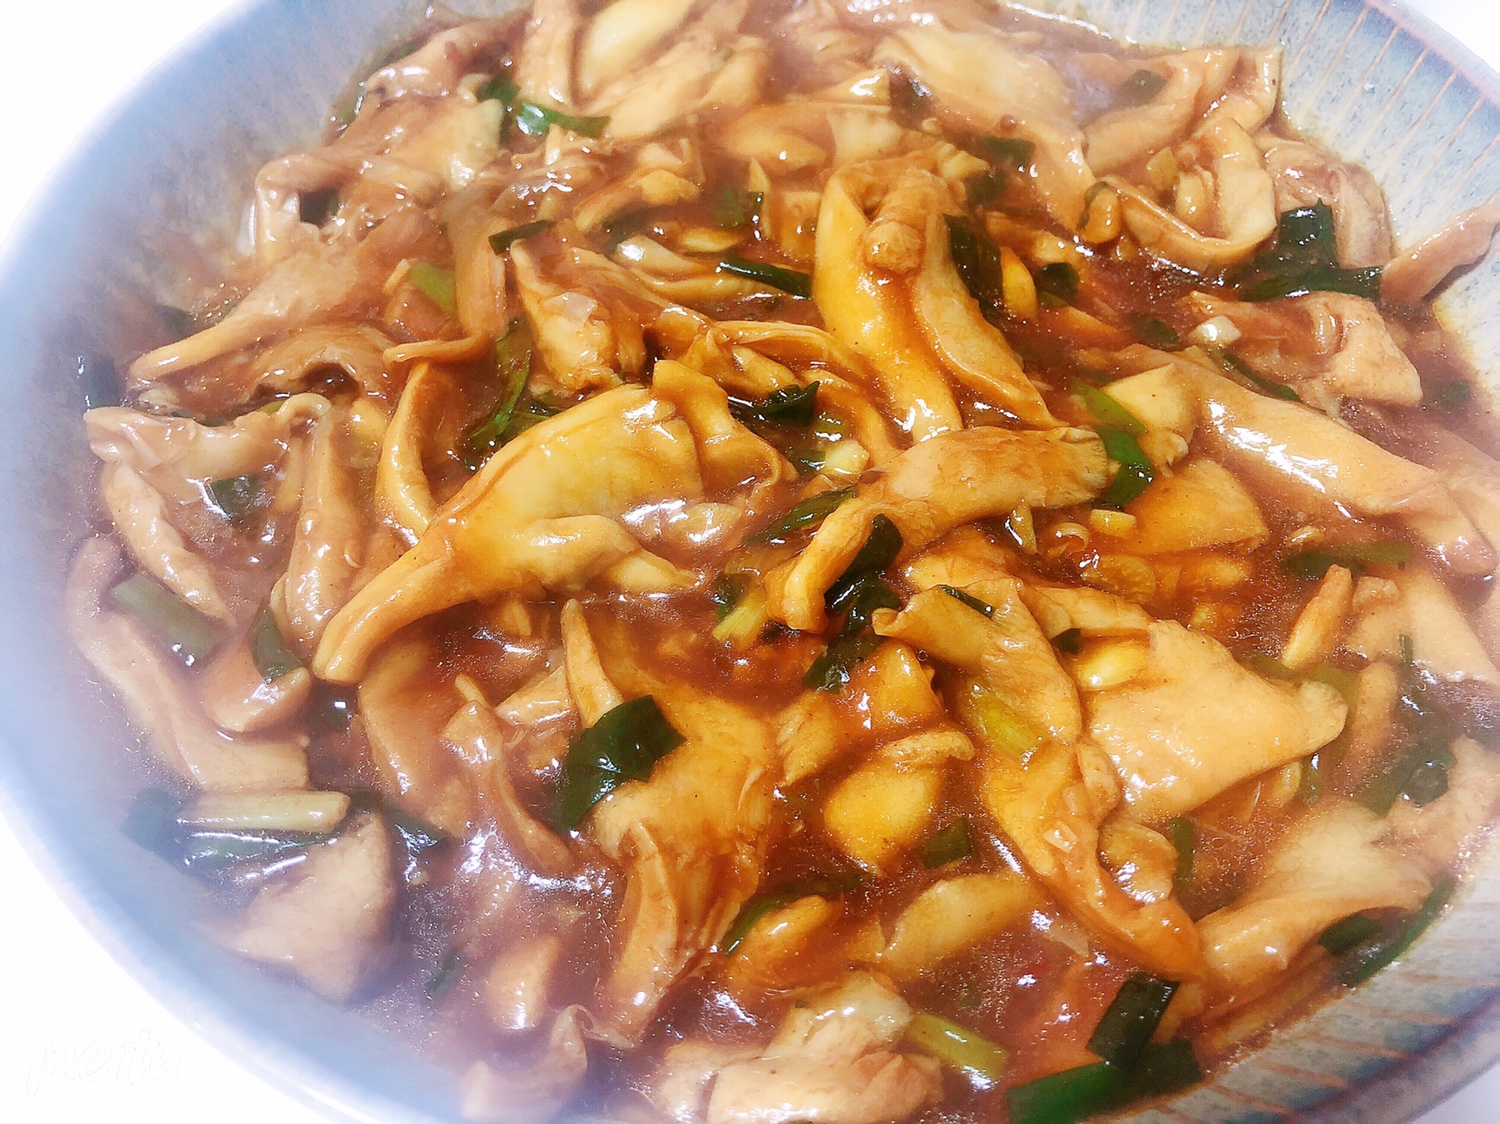 
The quick worker of office worker is simple dinner -- the practice of sweet green bright mushroom